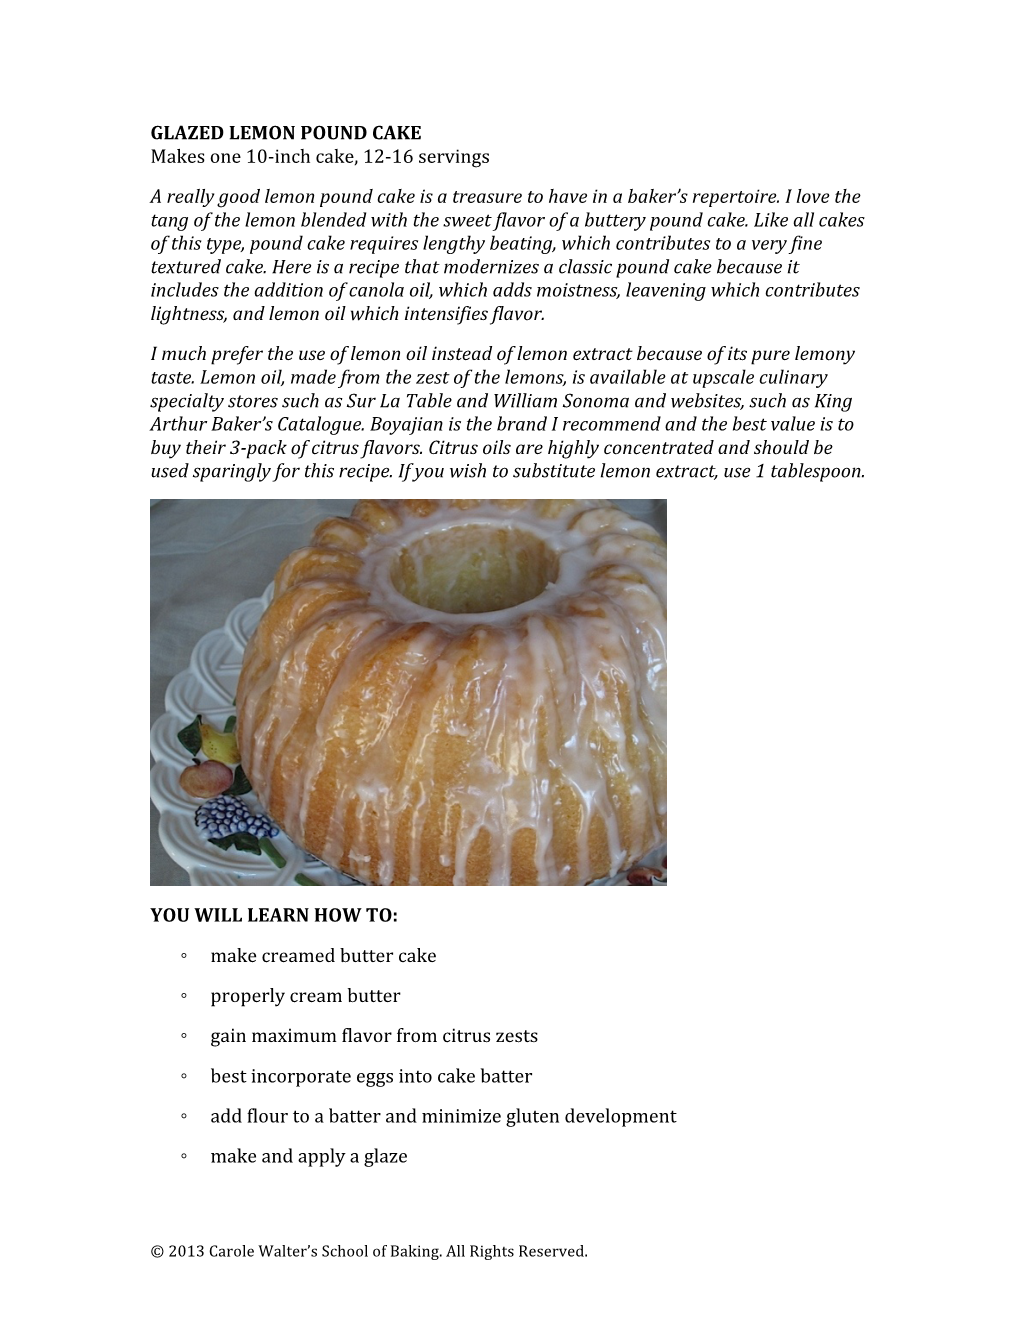 GLAZED LEMON POUND CAKE Makes One 10-Inch Cake, 12-16 Servings a Really Good Lemon Pound Cake Is a Treasure to Have in a Baker’S Repertoire